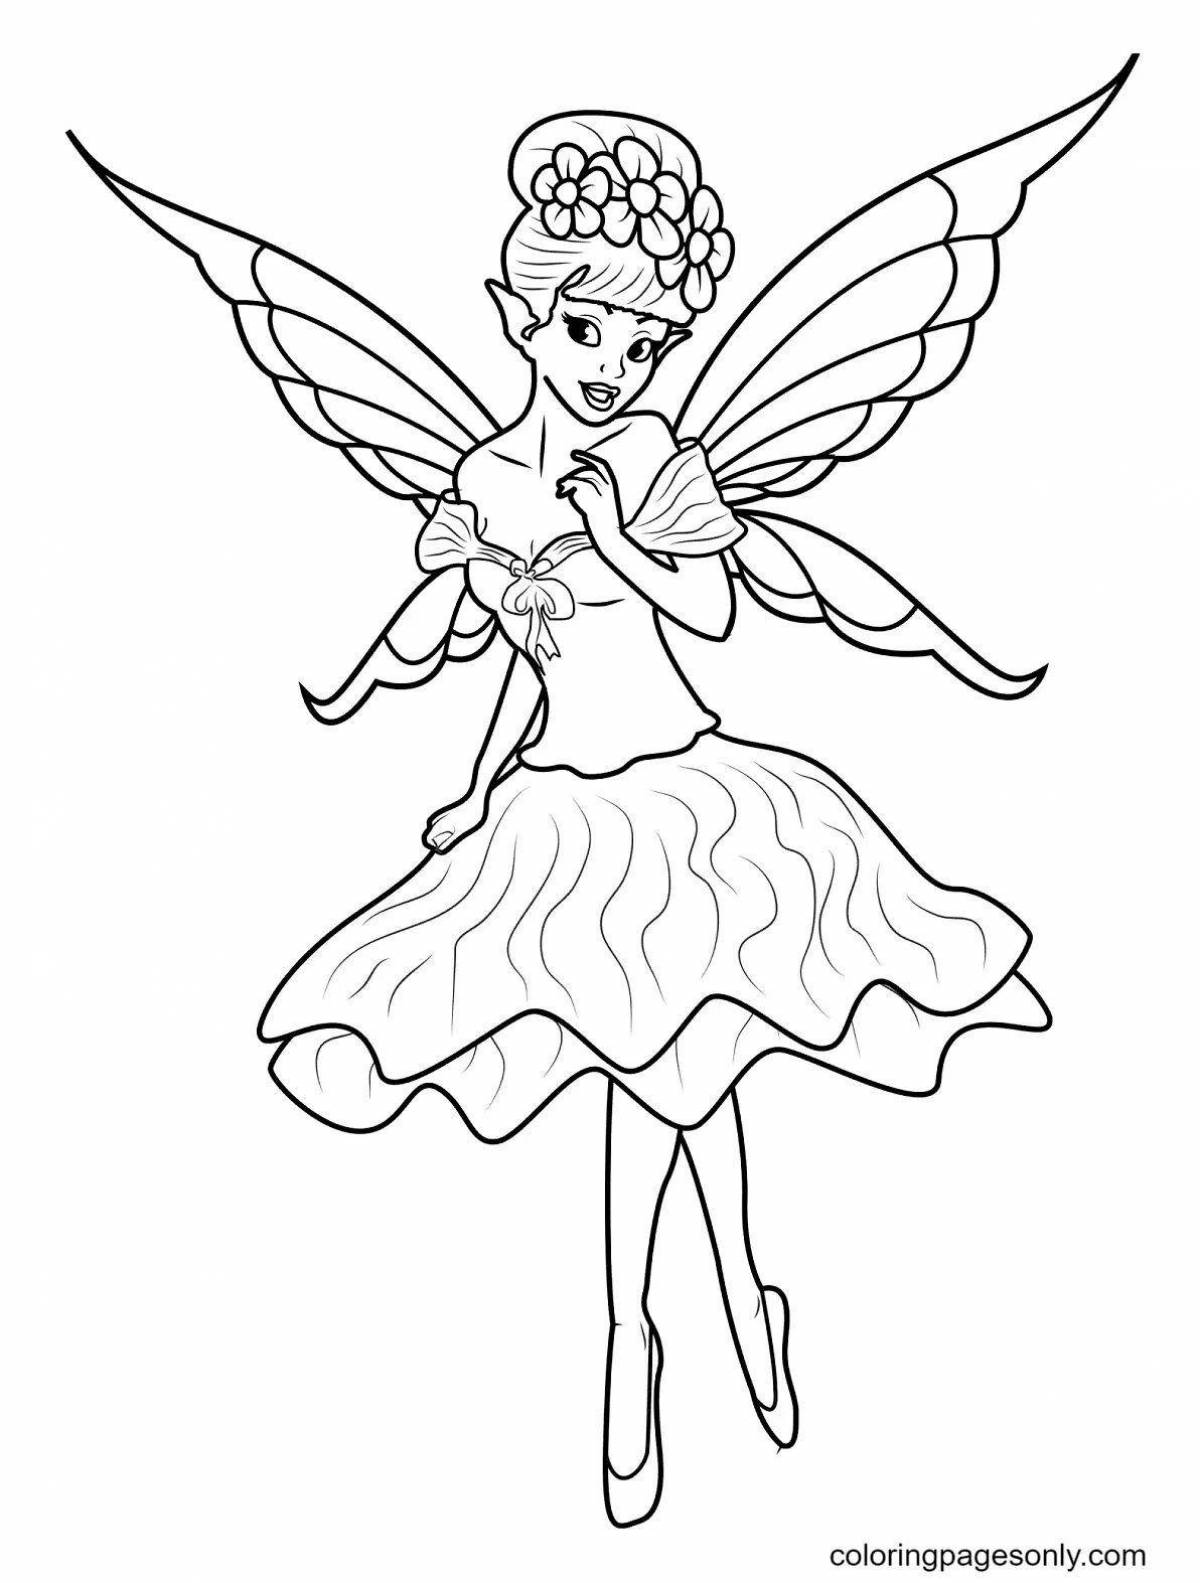 Funny fairy coloring pages for kids